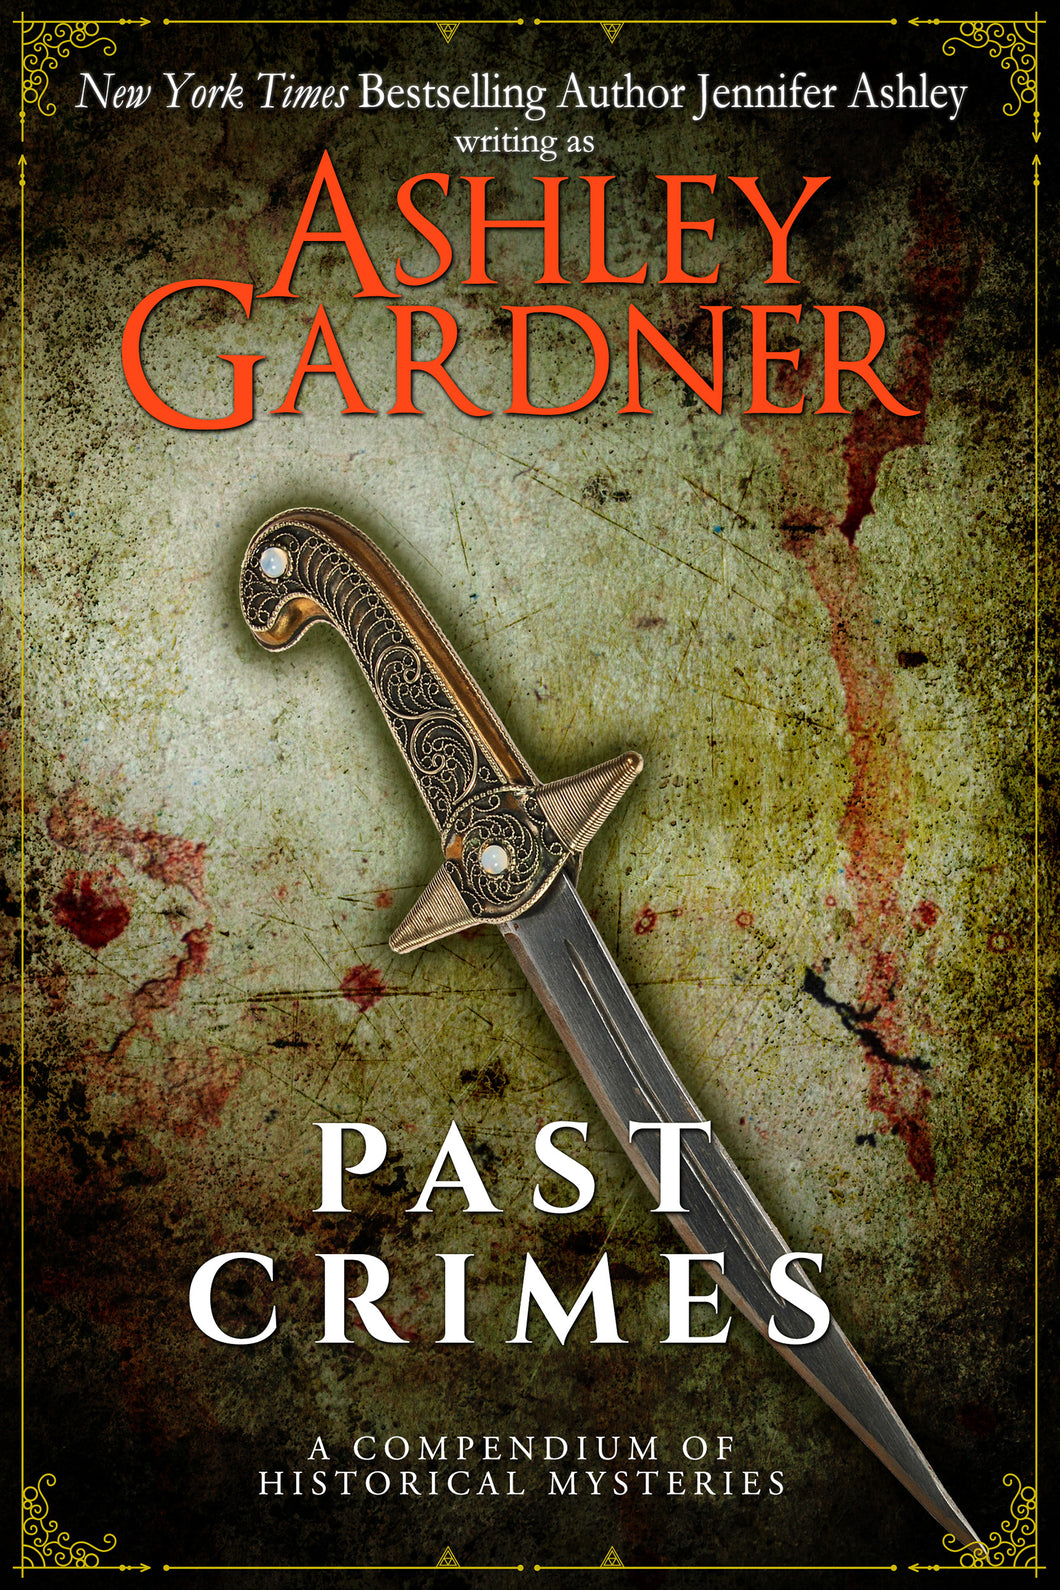 Past Crimes (A Compendium of Historical Mysteries)